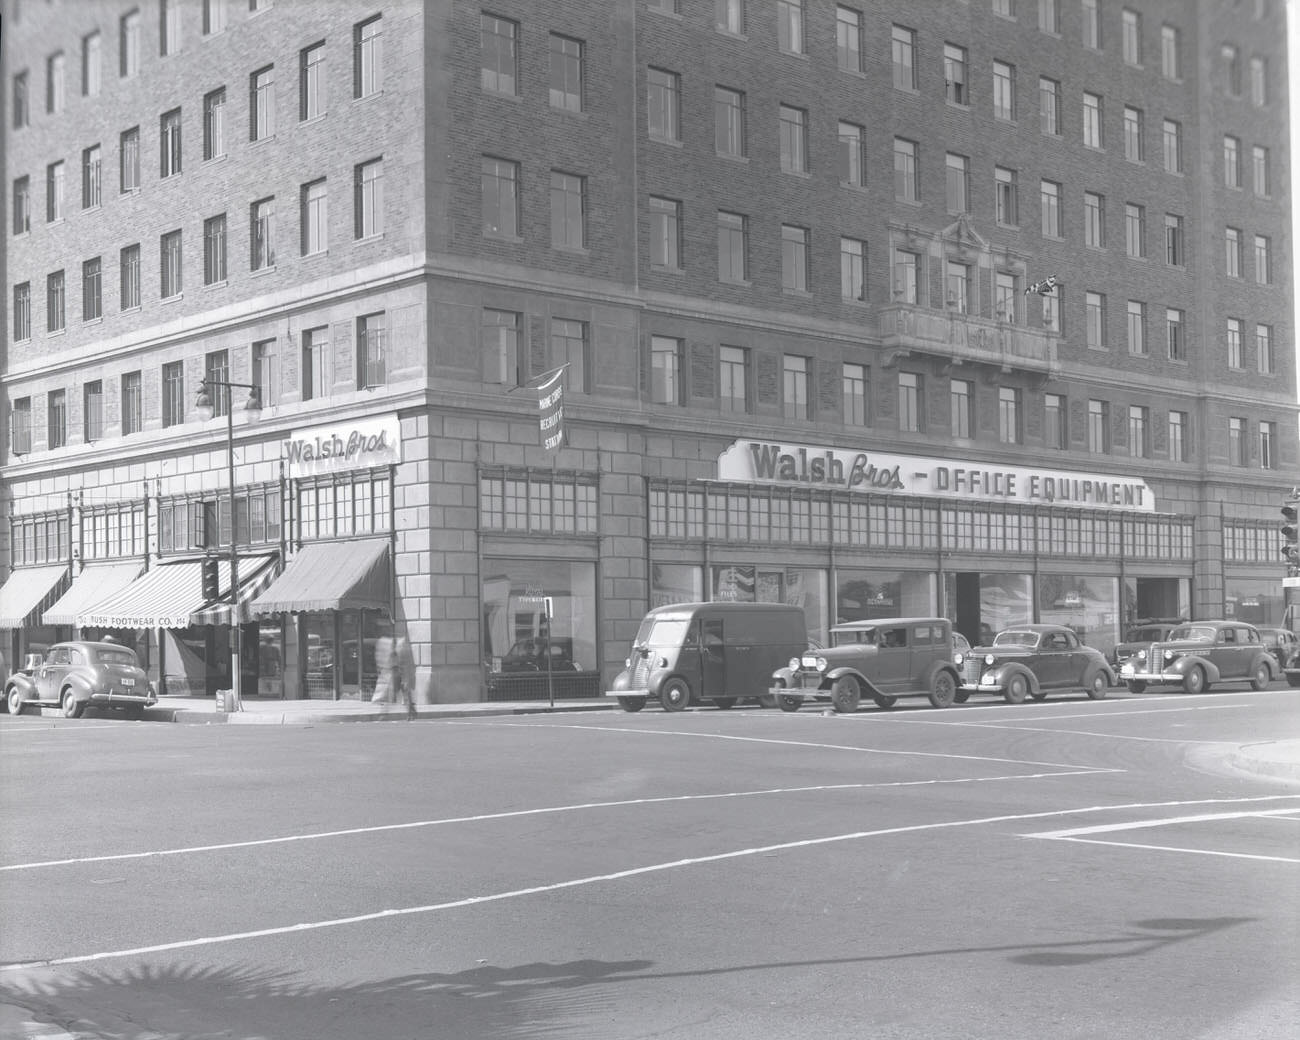 Walsh Bros. Office Equipment Store Exterior, 1942